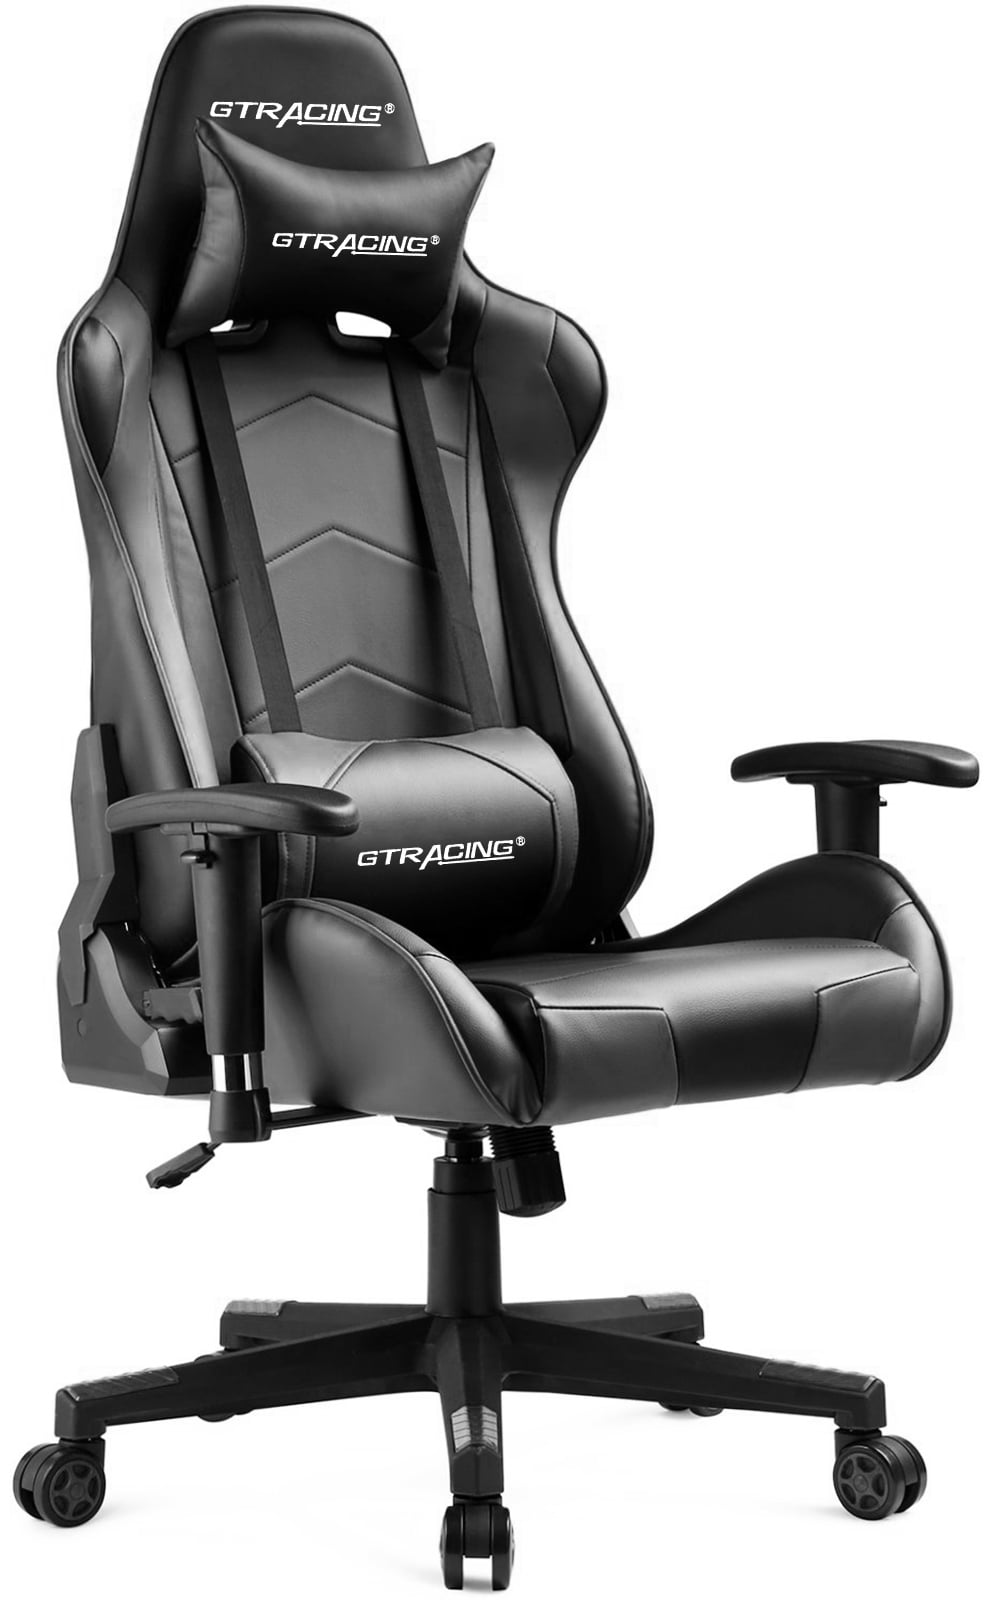 GTRACING GTPLAYER Gaming Chair Office Chair PU Leather with Adjustable Headrest and Lumbar Pillow, Gray